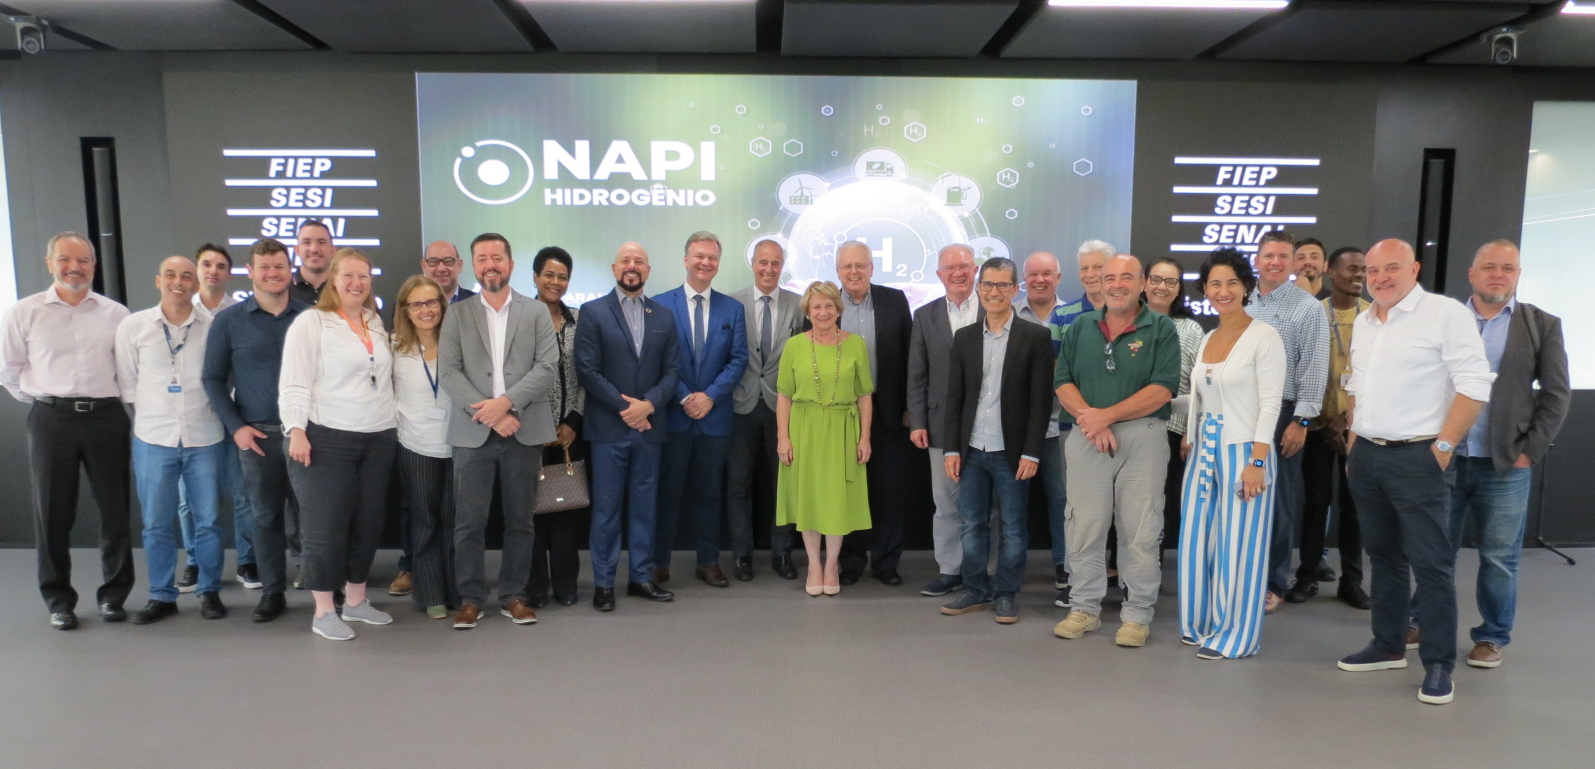 UEL integrates new arrangement for hydrogen research and innovation (Napi)